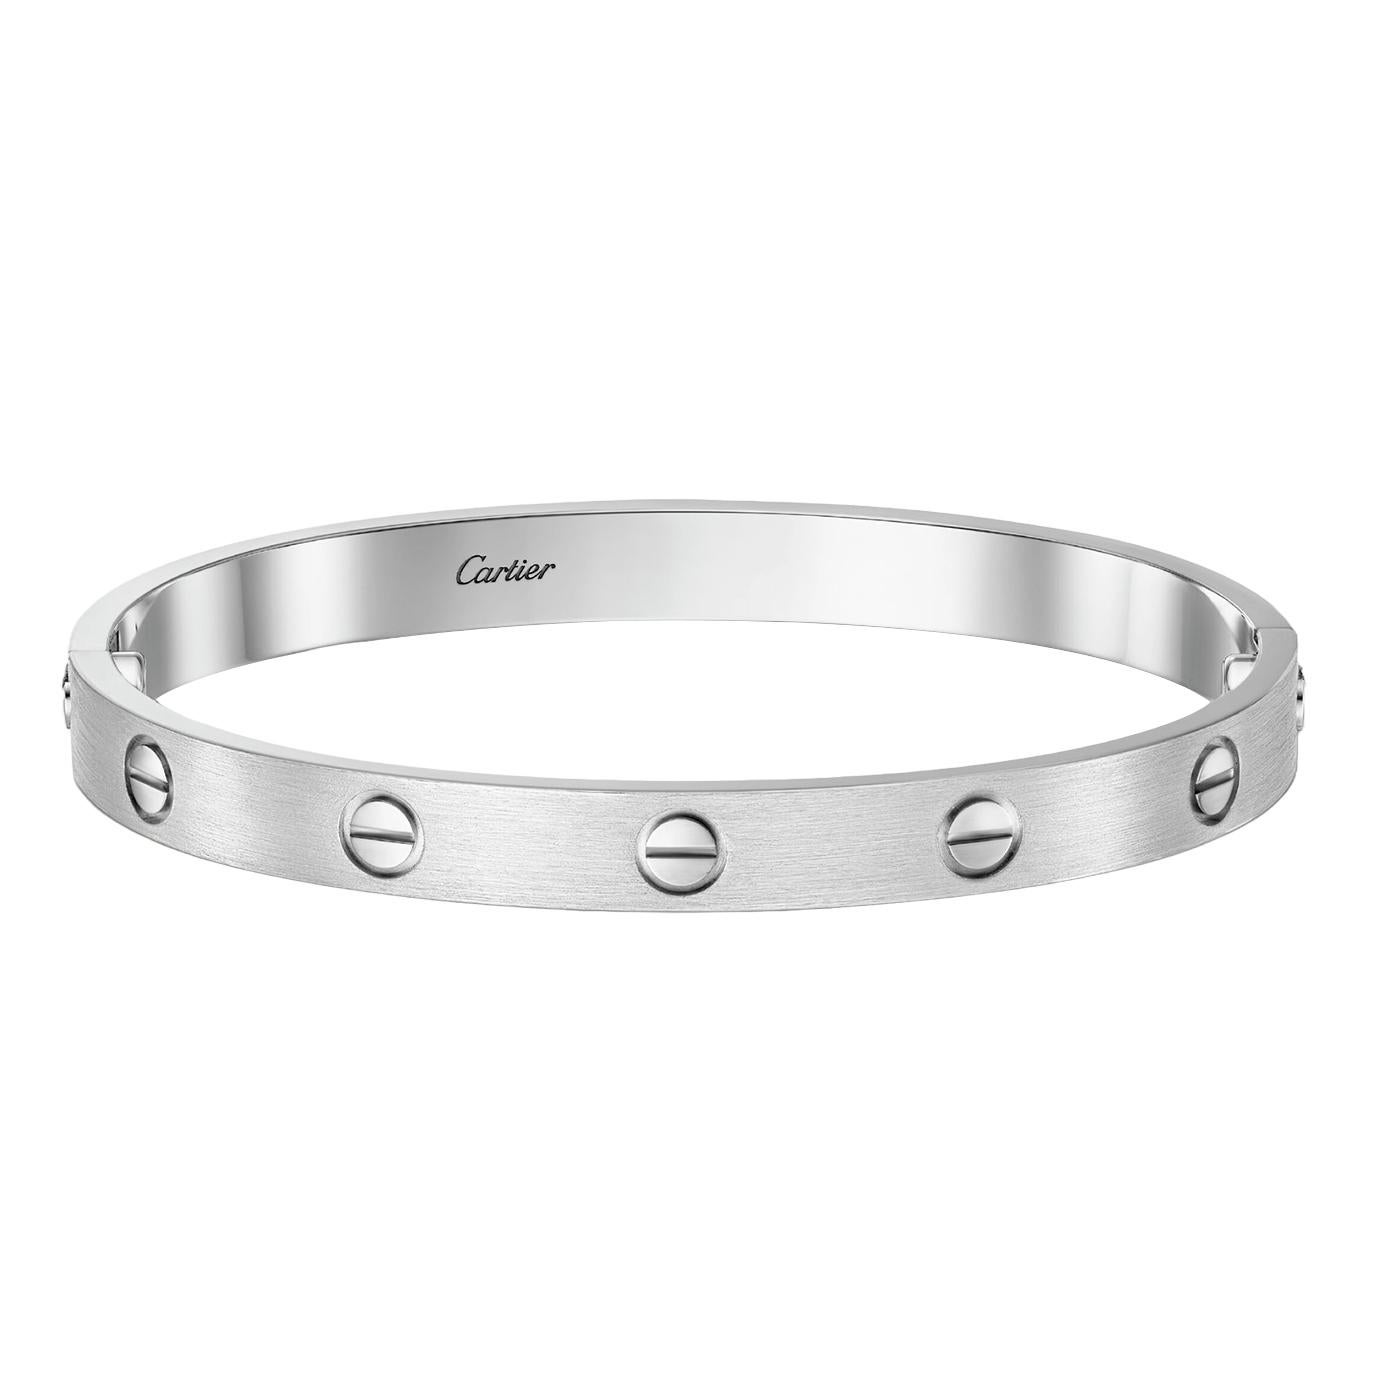 LOVE bracelet, white gold 750/1000, brushed finish. Comes with a screwdriver. Width: 6.1 mm. Created in New York in 1969, the LOVE bracelet is a jewelry design icon: a close-fitting, oval bracelet composed of two rigid arcs, which is worn on the